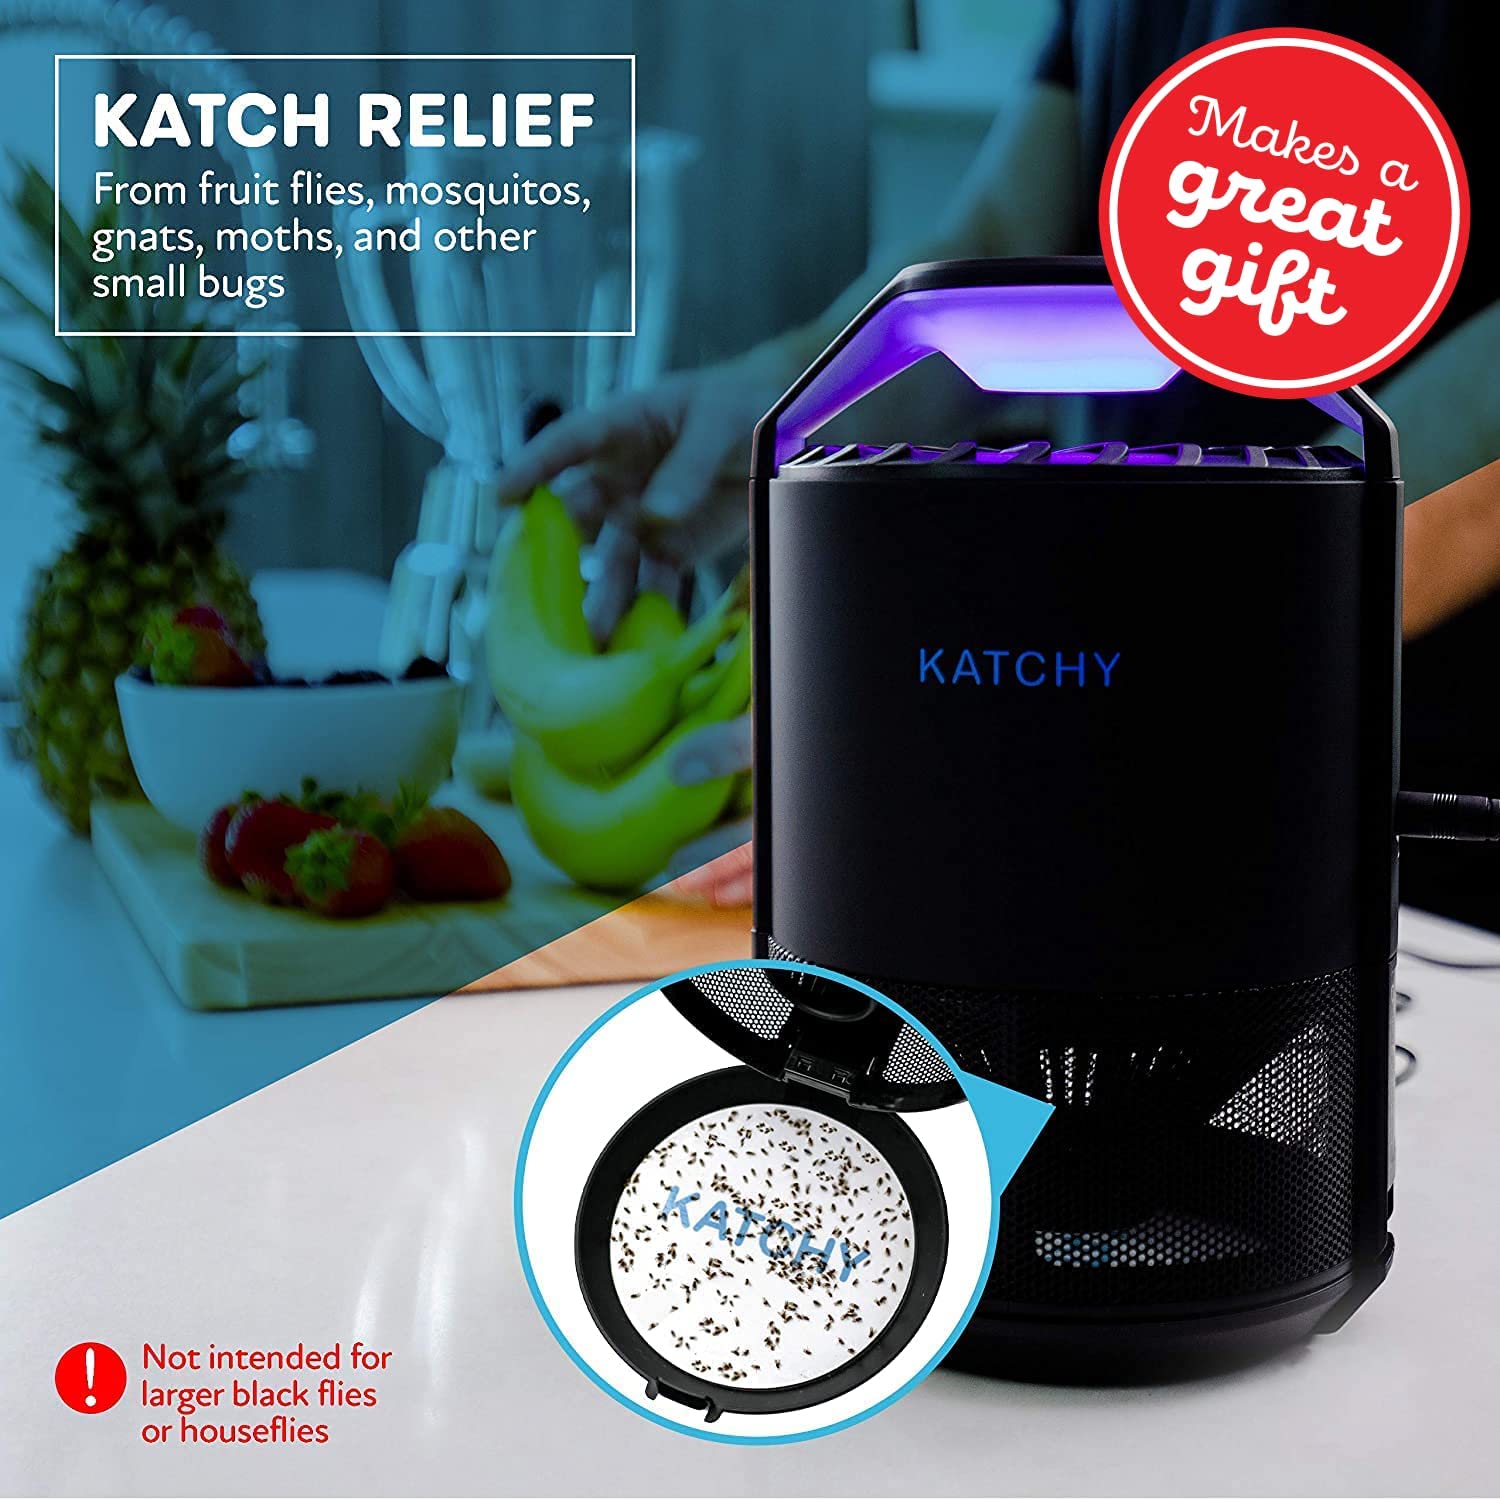 Katchy's Newest Indoor Fly Trap Kills Bugs 24/7